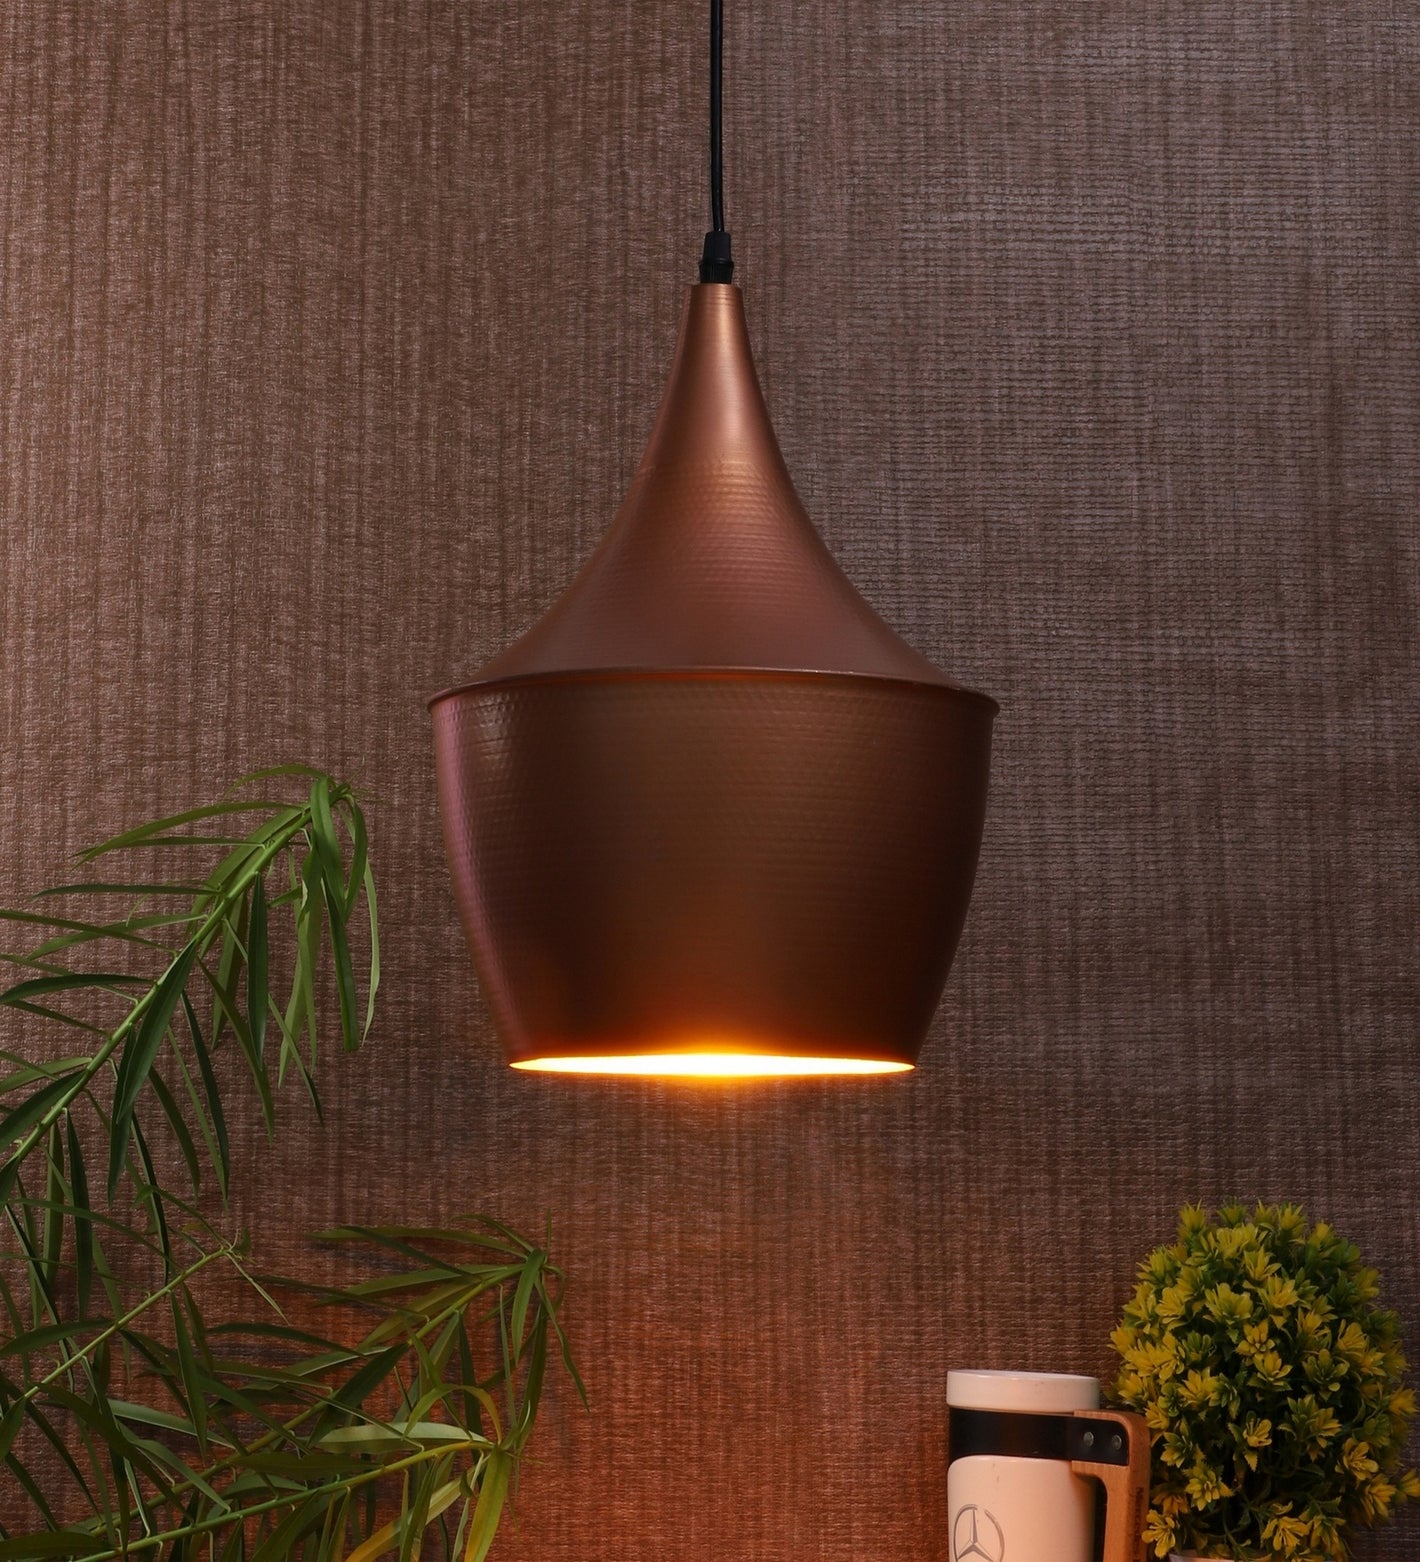 Copper Metal Hanging Light -Dholak-Rd-Cop - Included Bulb